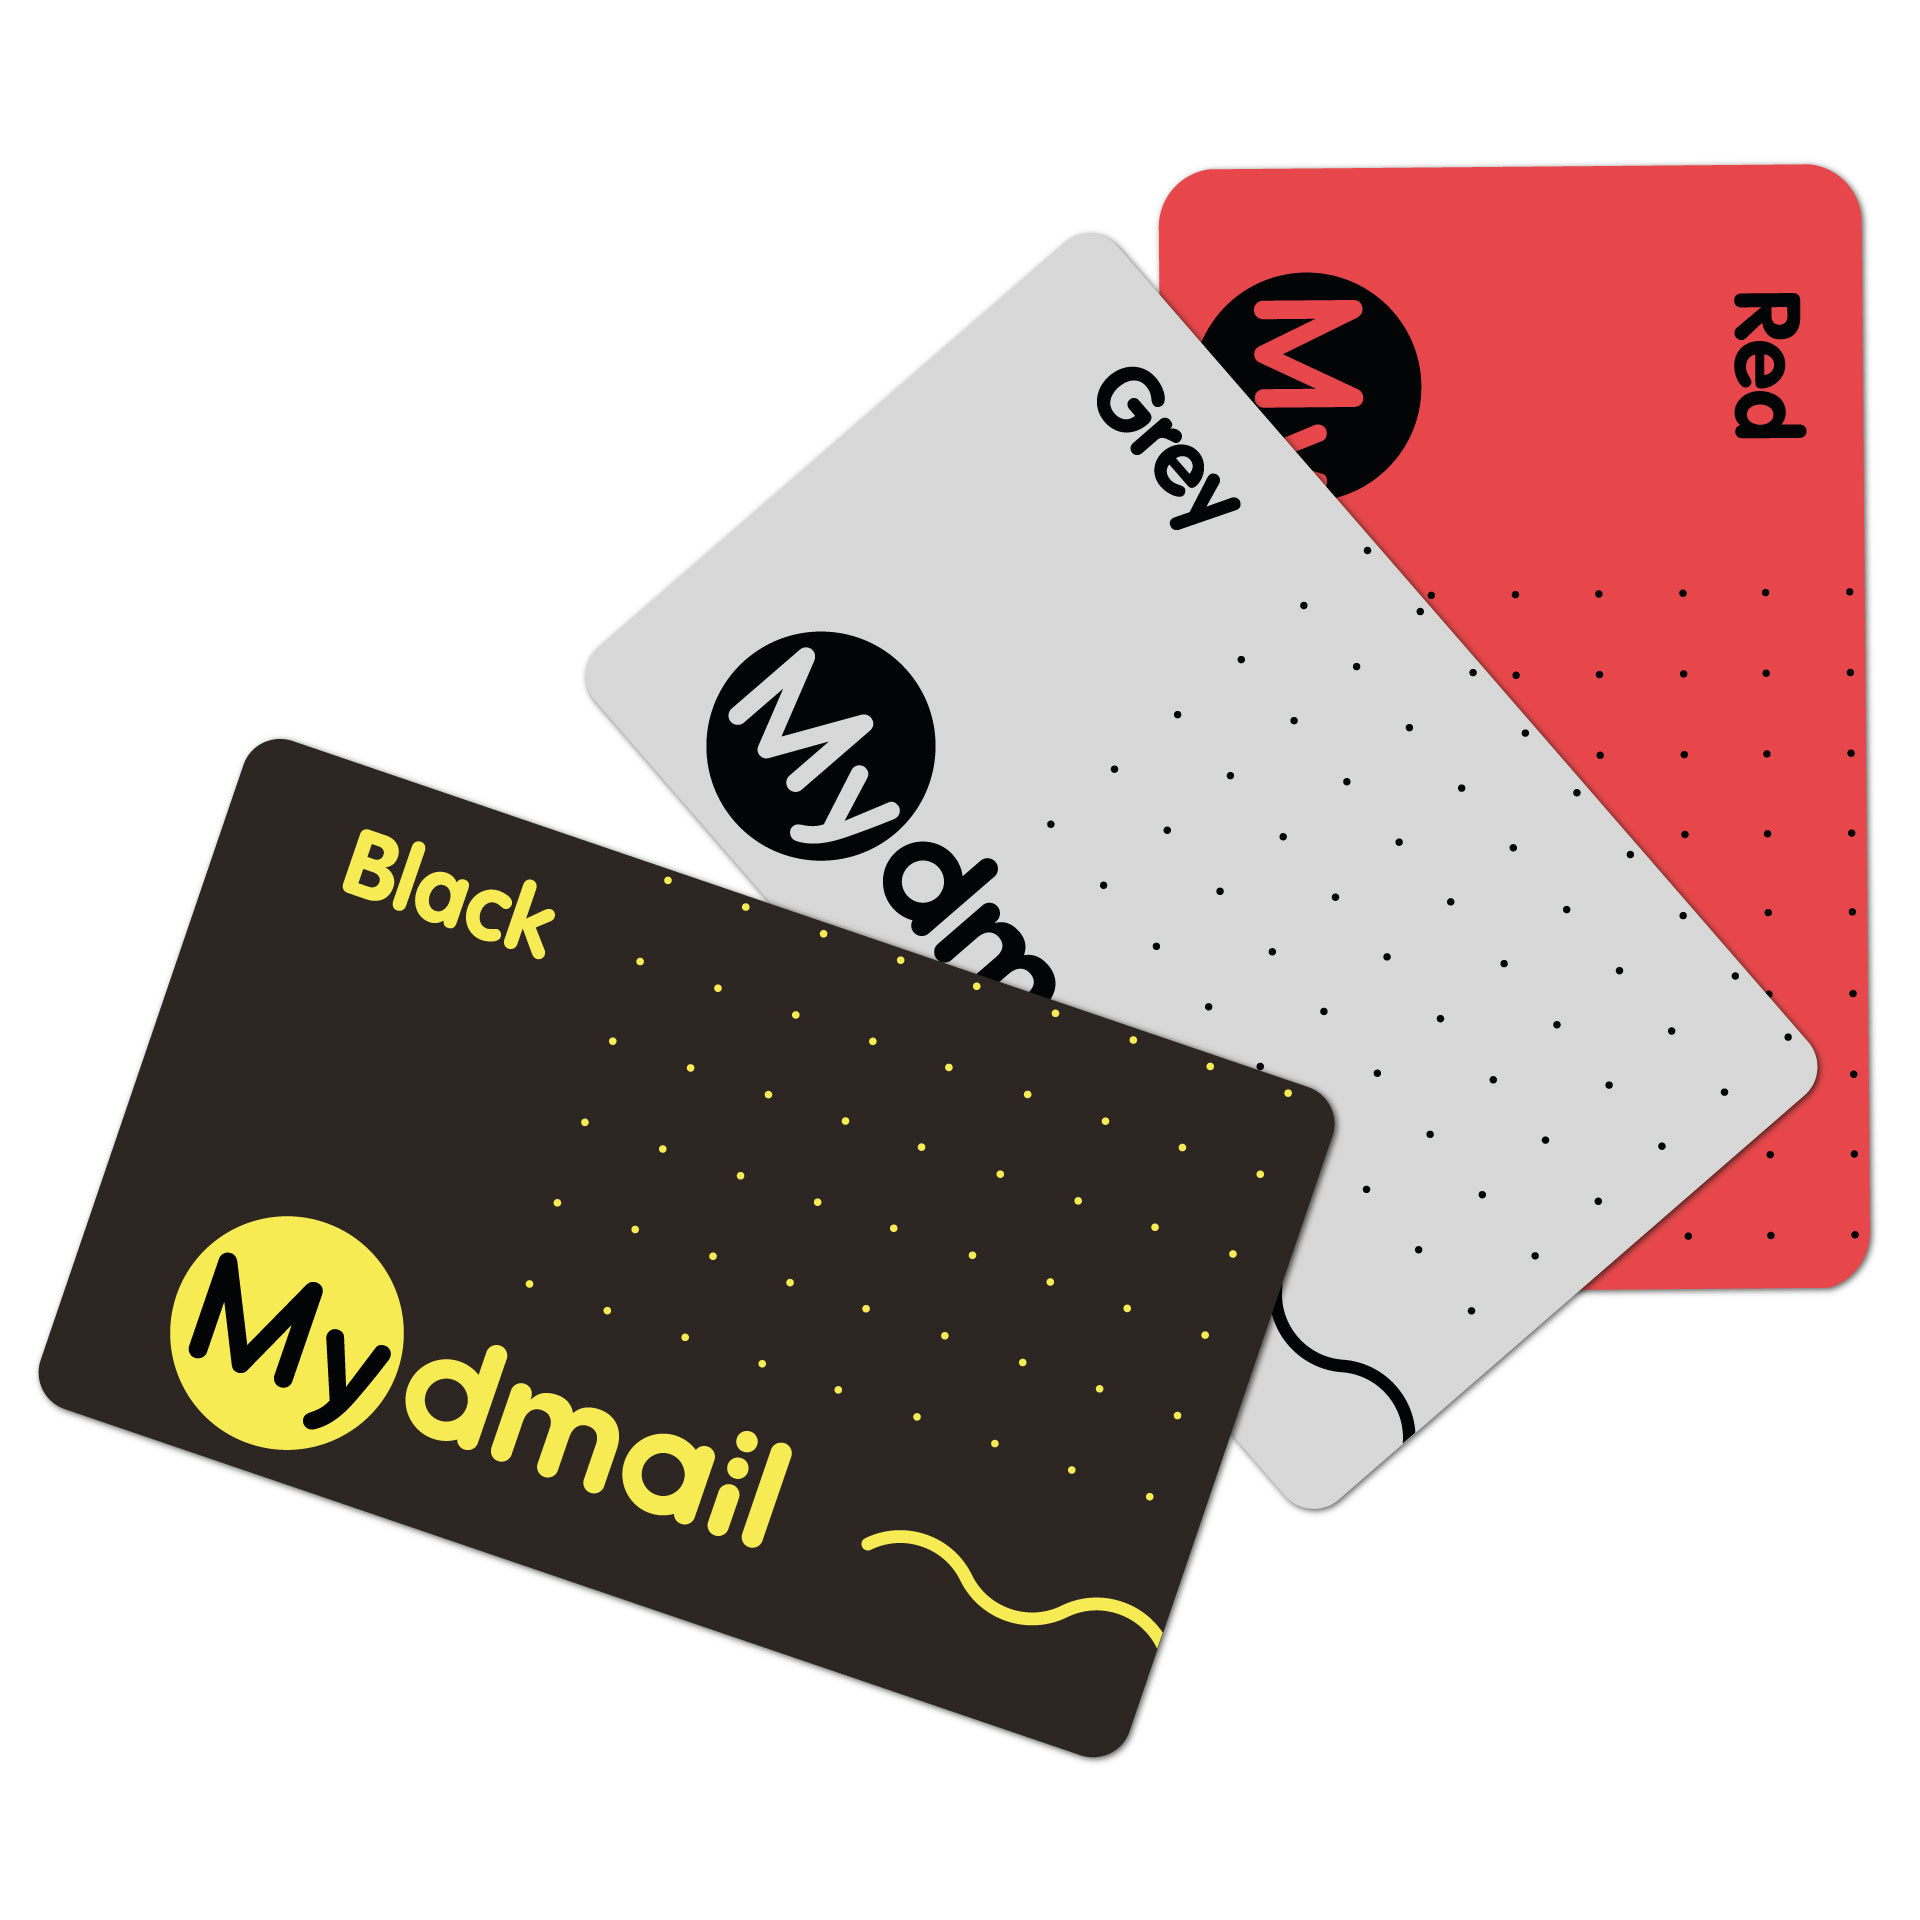 dmail card